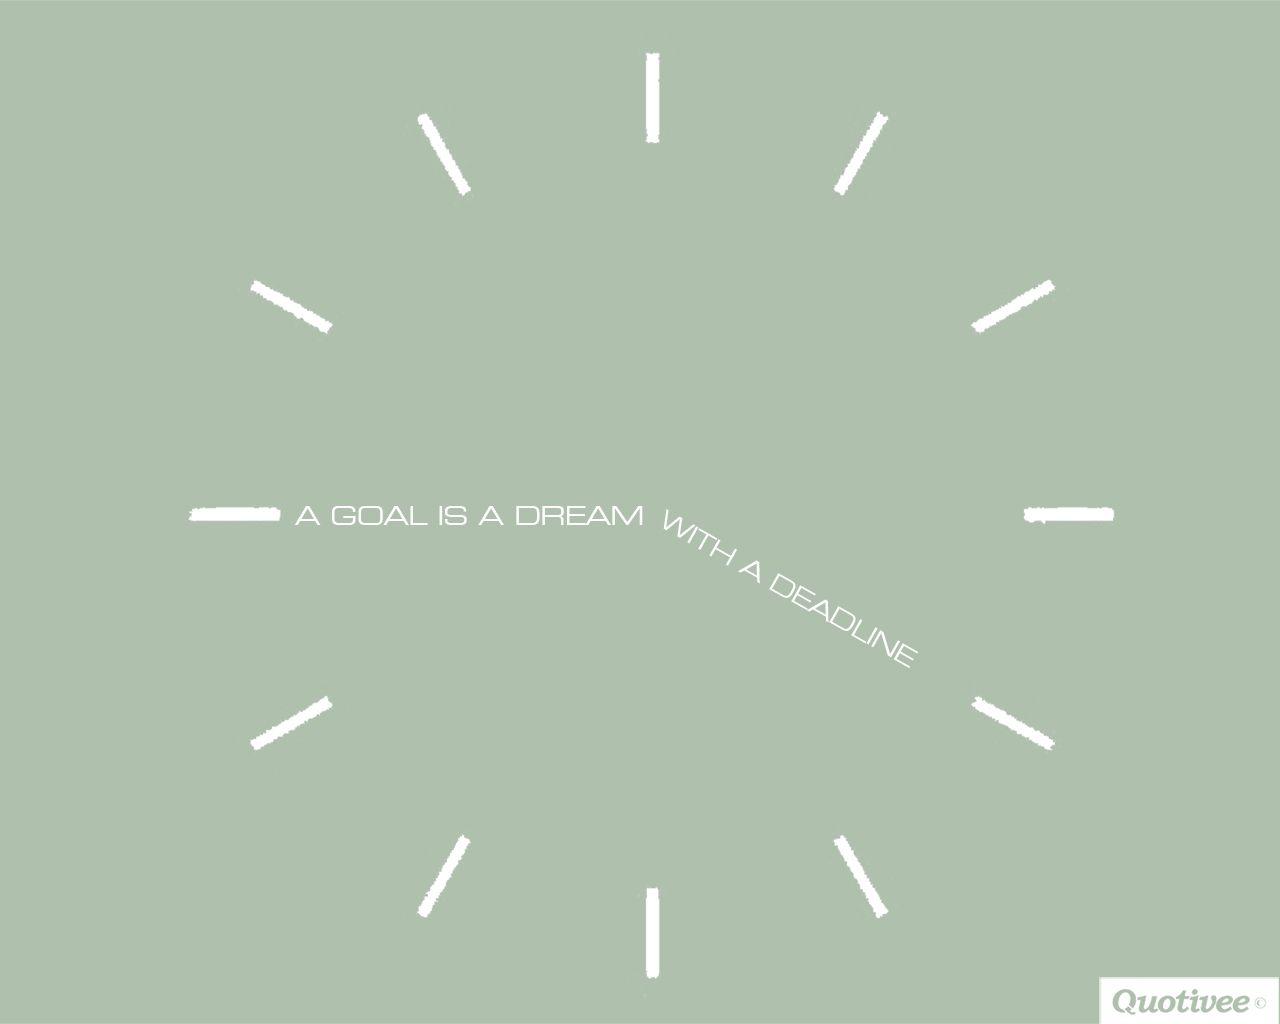 Motivational Wallpaper on Time: A Goal is a dream with a deadline